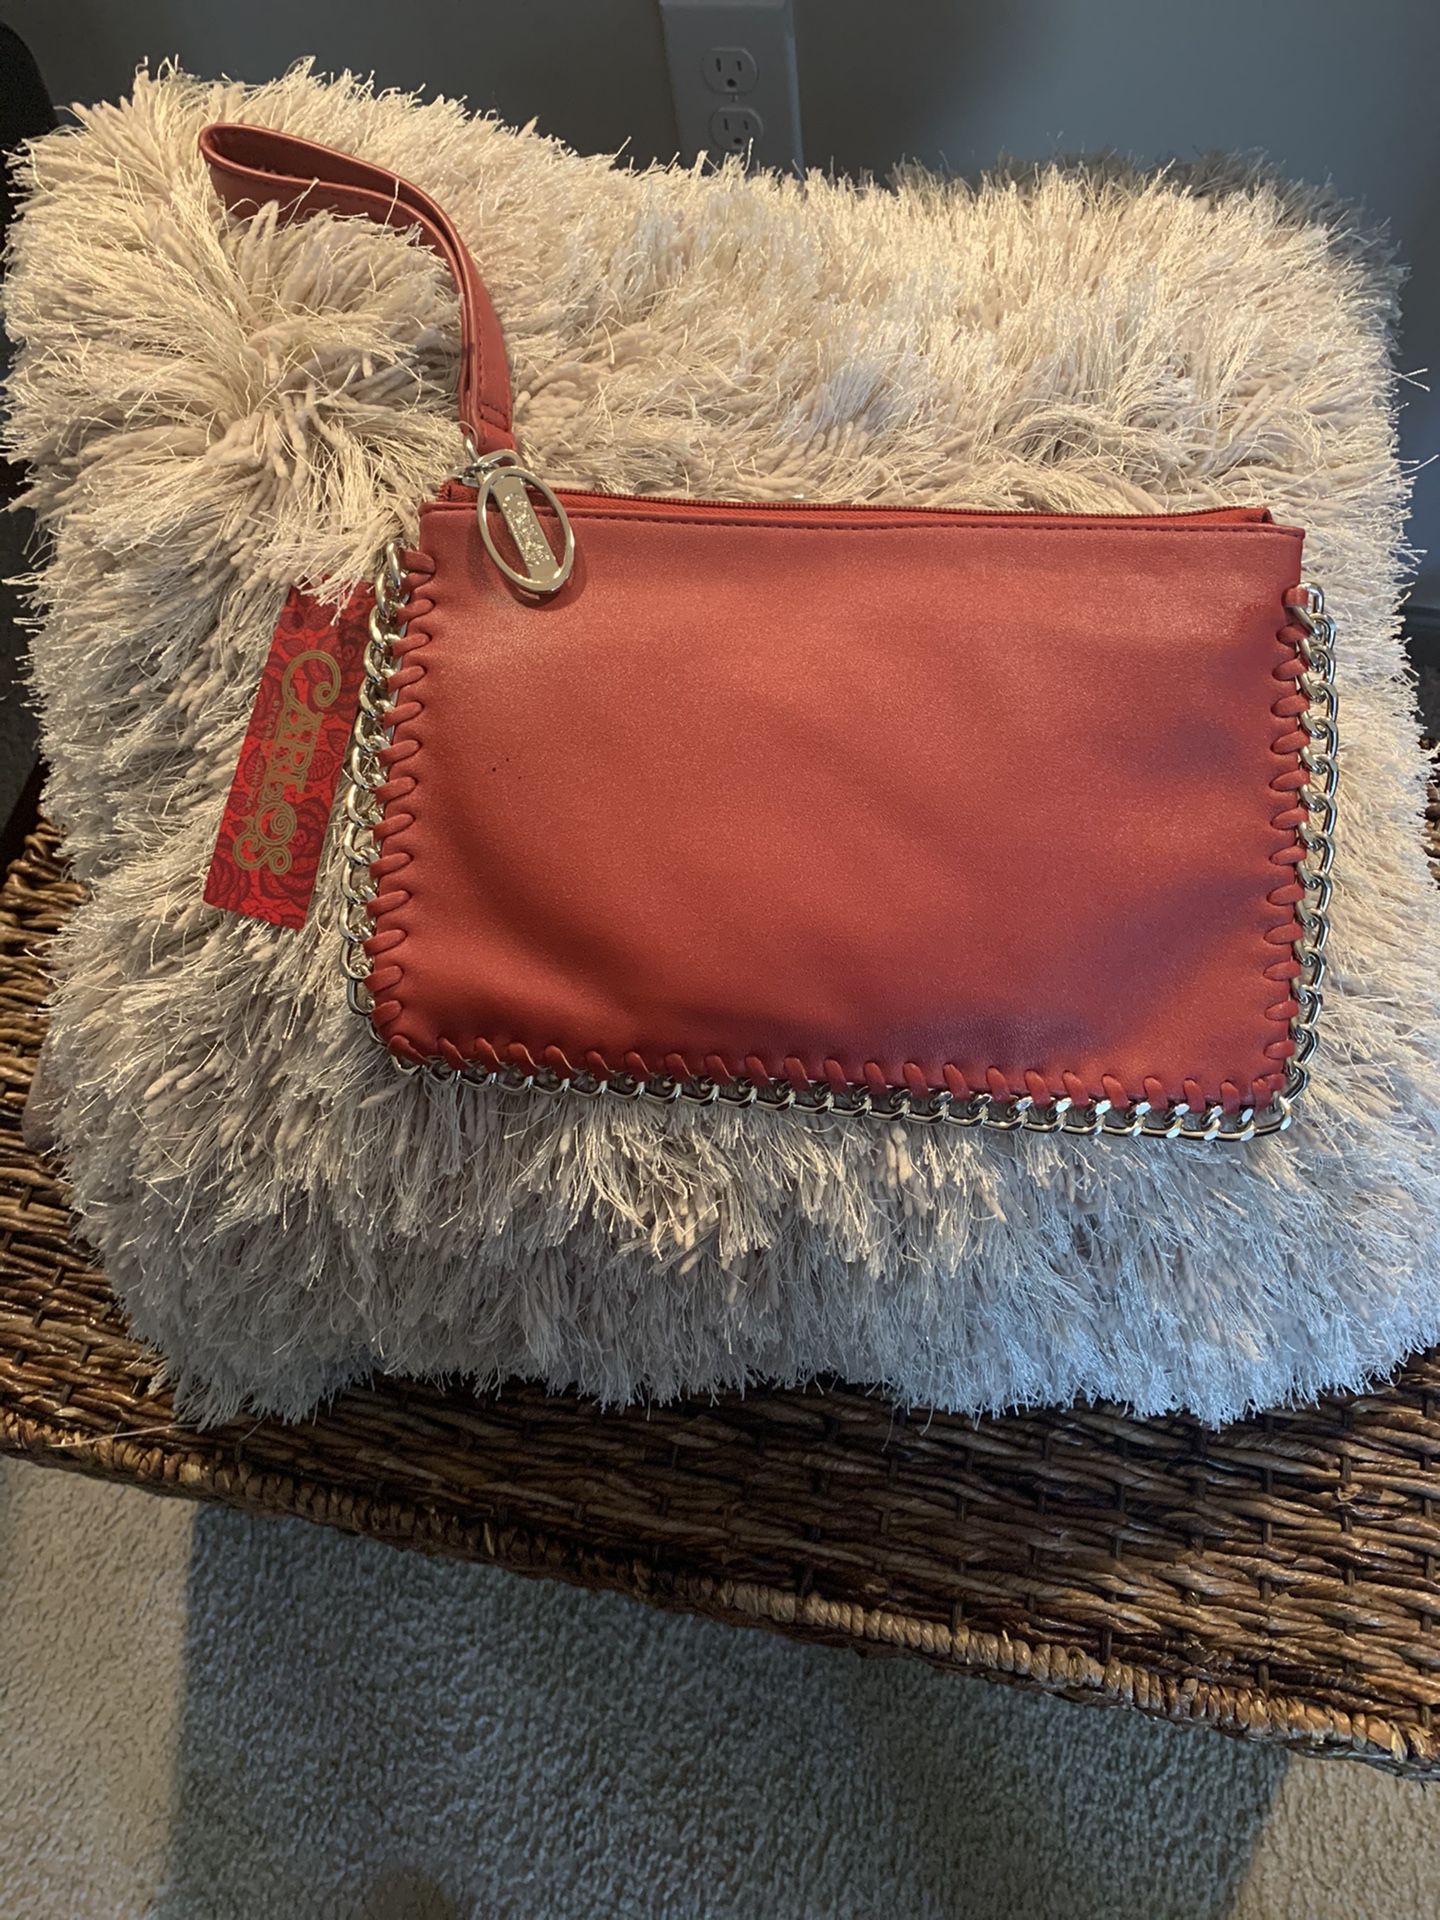 Red Clutch - NEW!